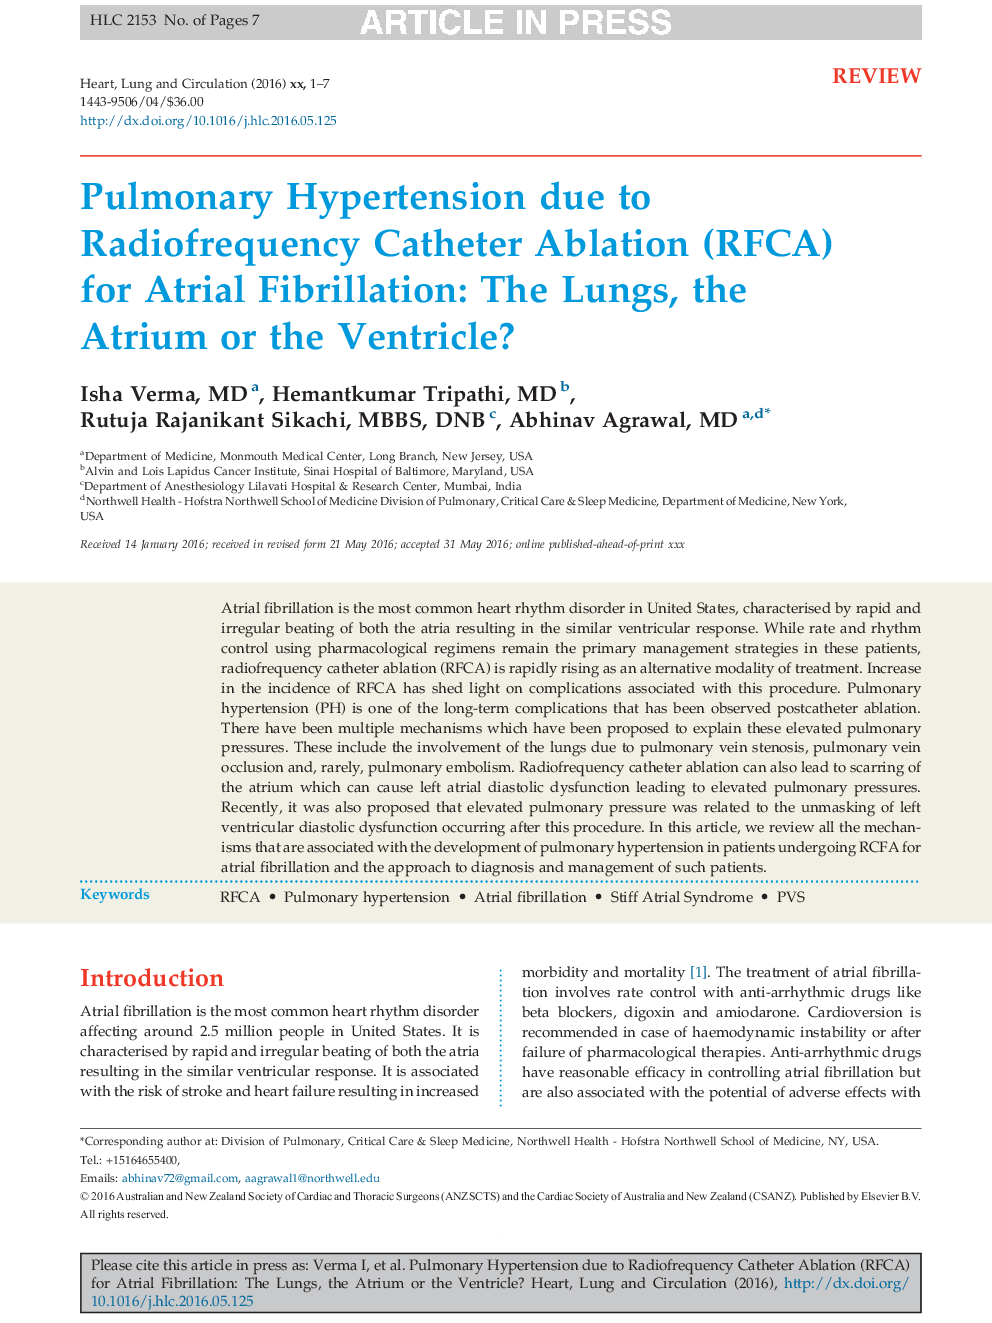 Pulmonary Hypertension due to Radiofrequency Catheter Ablation (RFCA) for Atrial Fibrillation: The Lungs, the Atrium or the Ventricle?